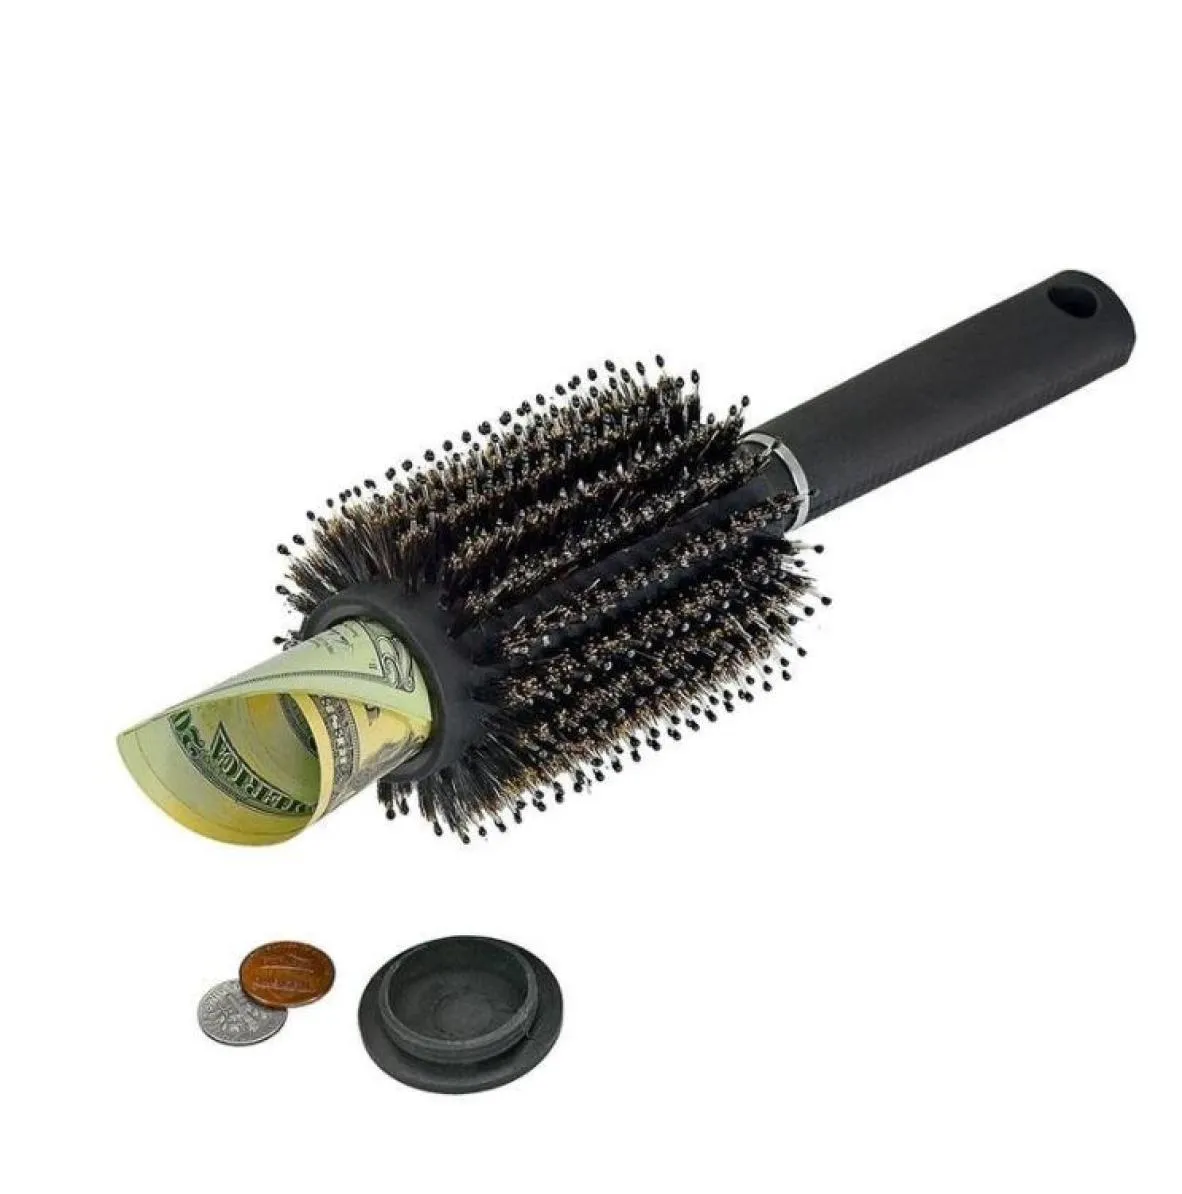 Hair Brush comb Hollow Container Black Stash Safe Diversion Secret Security Hairbrush Hidden Valuables Home Security Storage box3216300